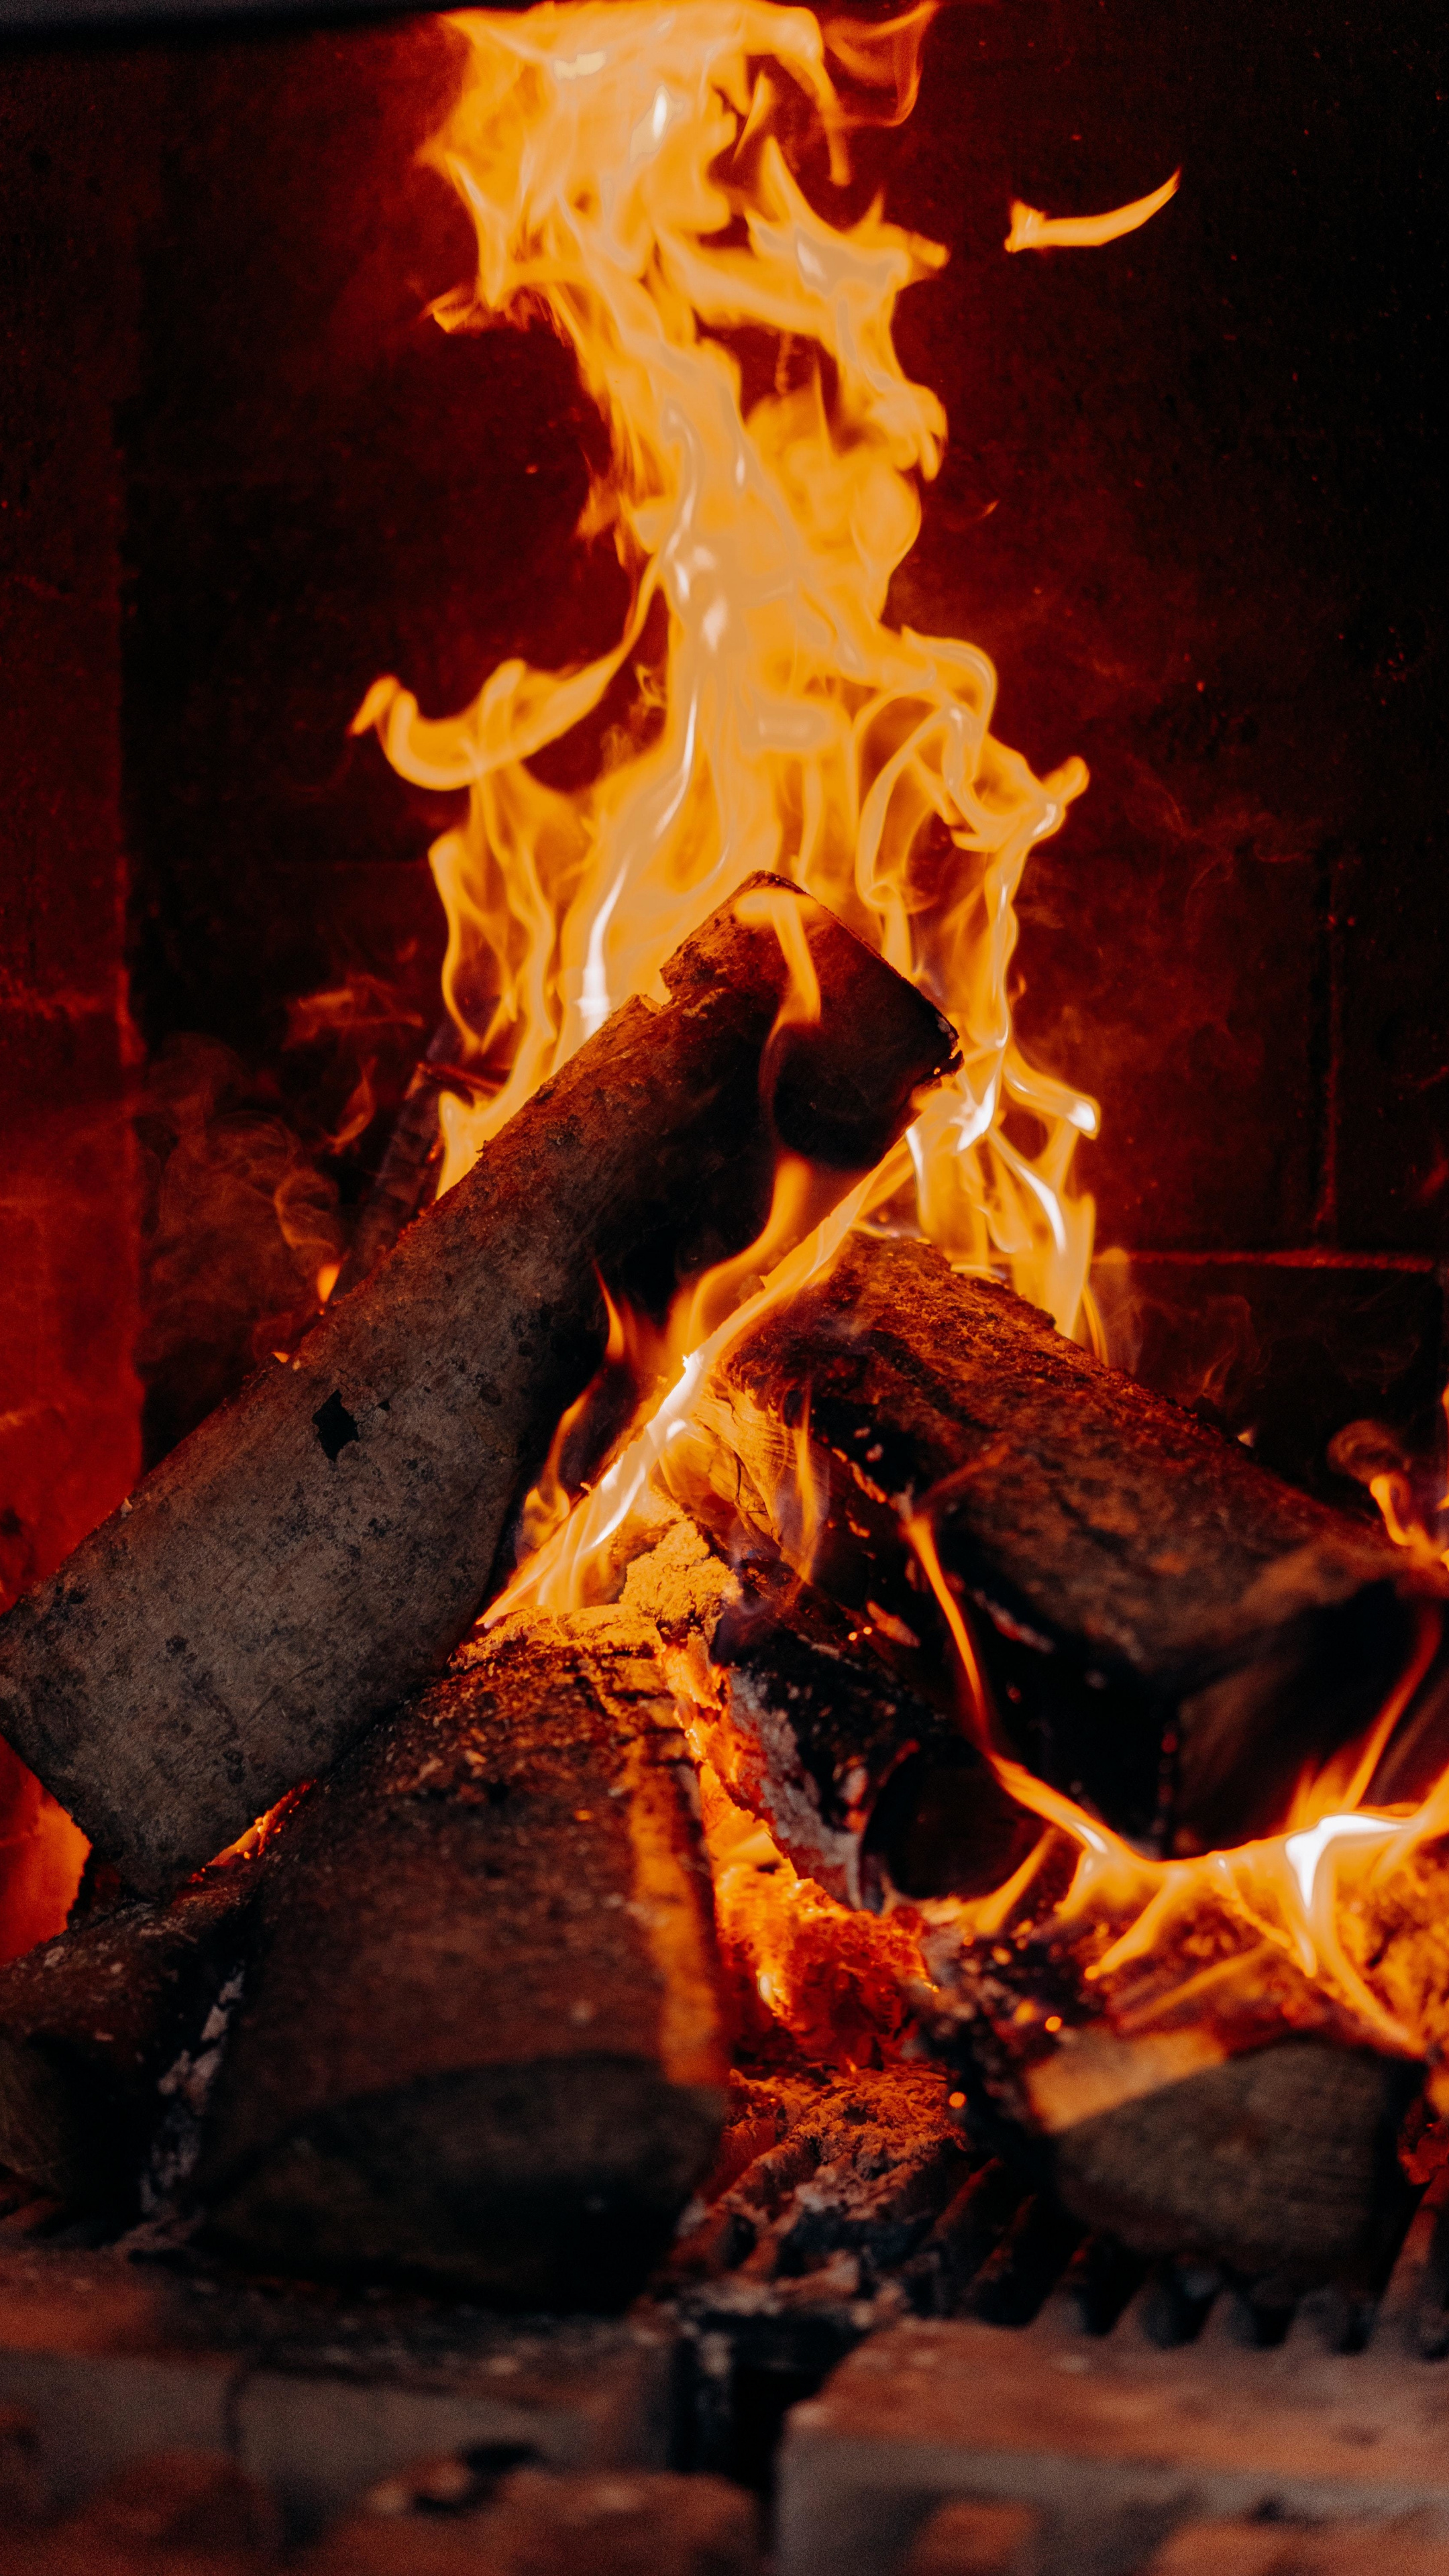 Wood fire close up, Sony Xperia Z5 Premium Dual HD image, Flame close up visuals, Flame images, Fire wallpaper backgrounds, 2160x3840 4K Handy